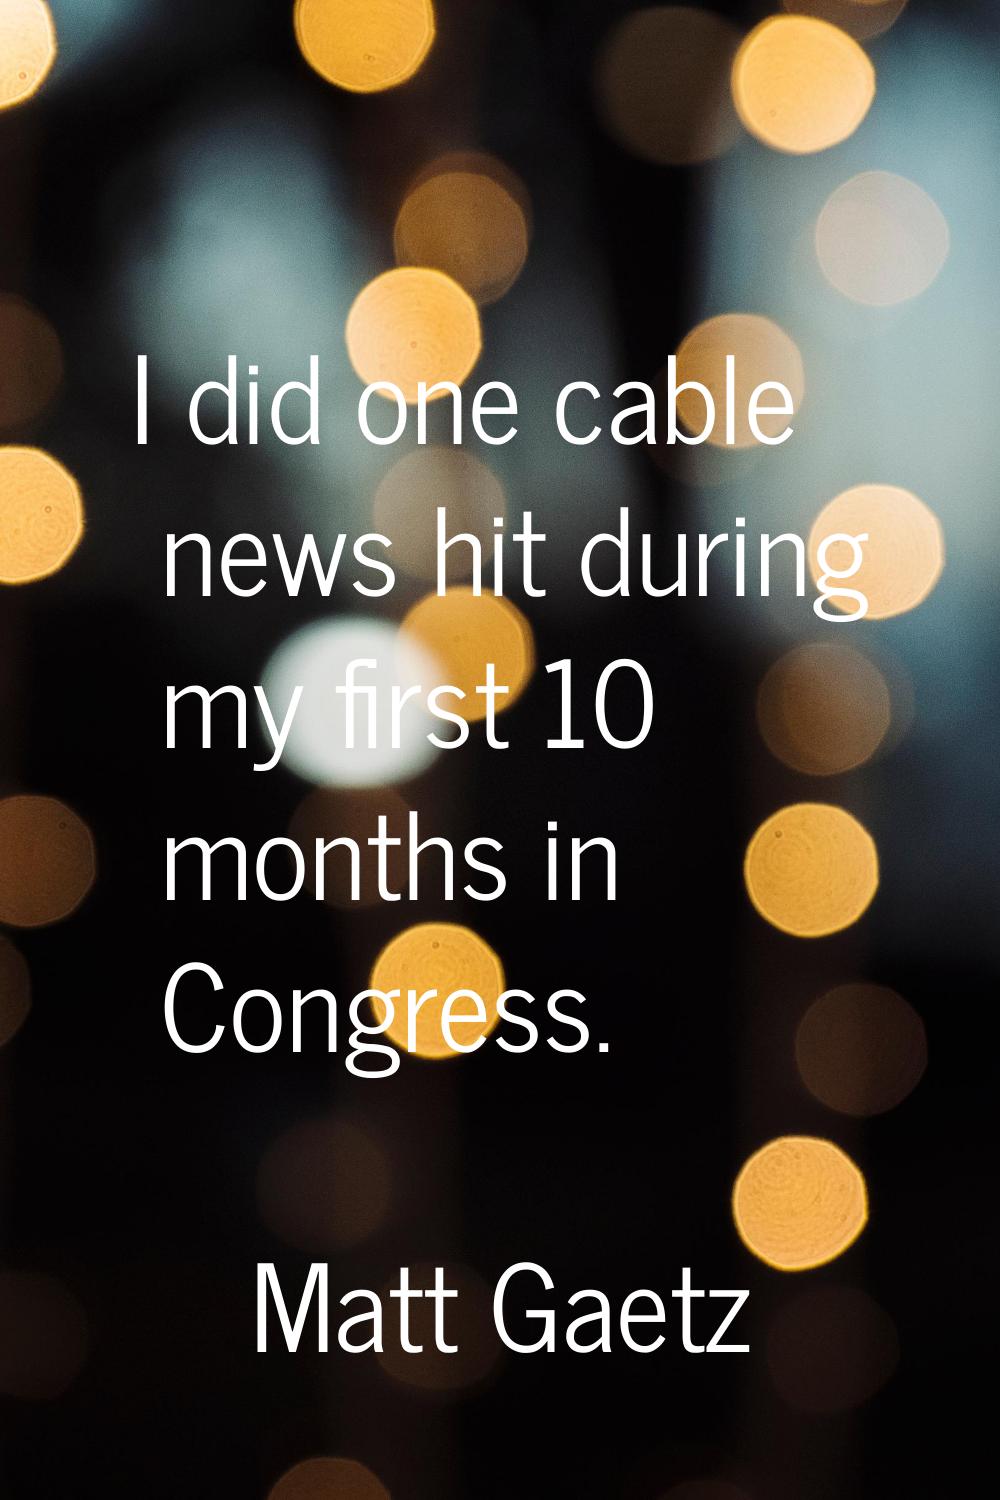 I did one cable news hit during my first 10 months in Congress.